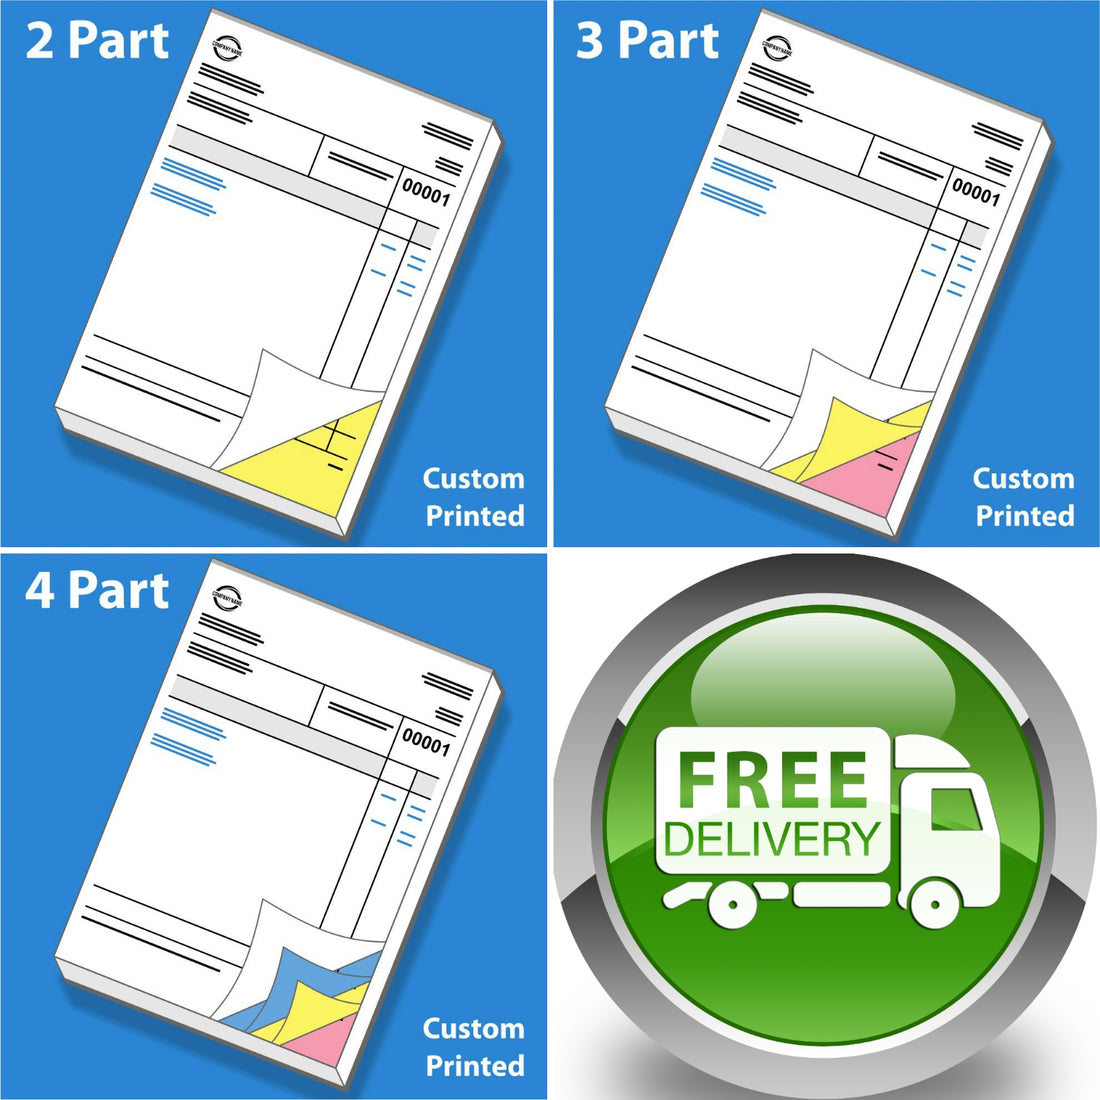 100% Customised NCR Pads Printing Service - Made to Order